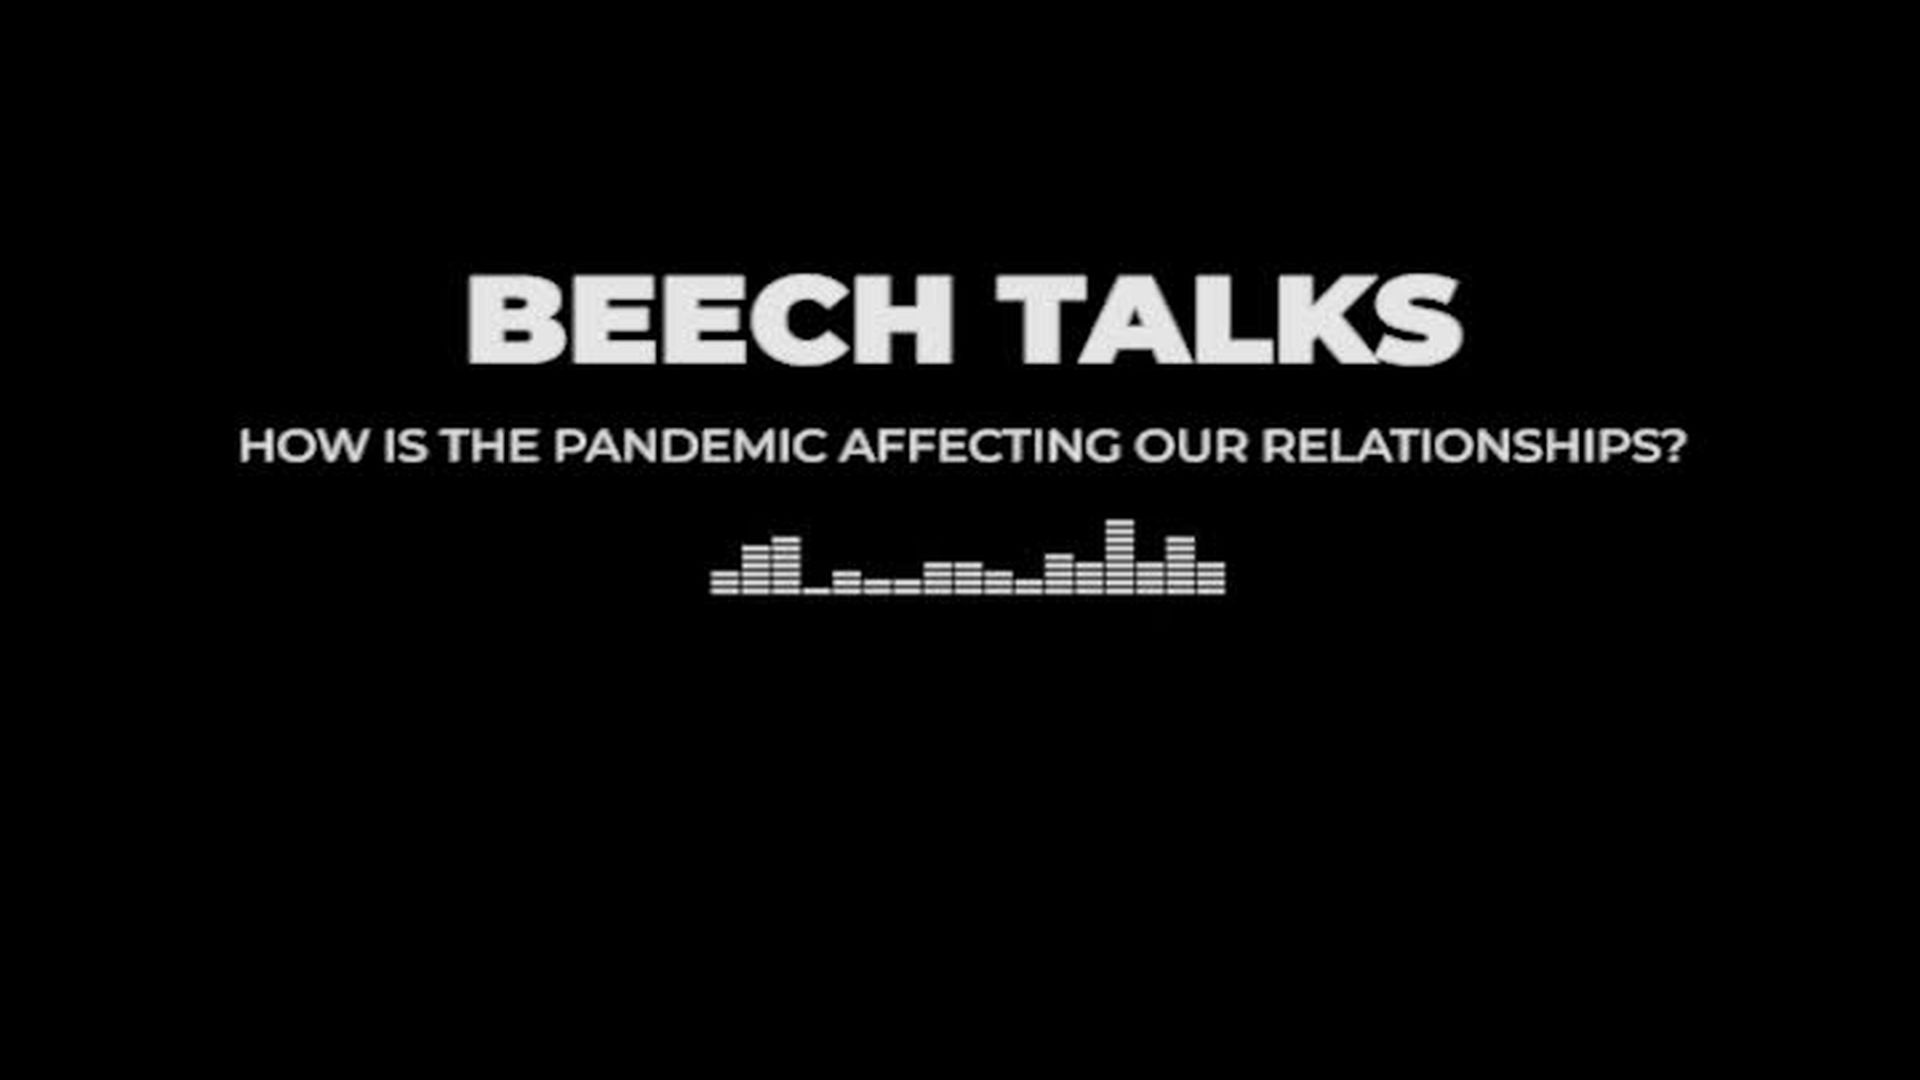 How is the pandemic affecting our relationships?